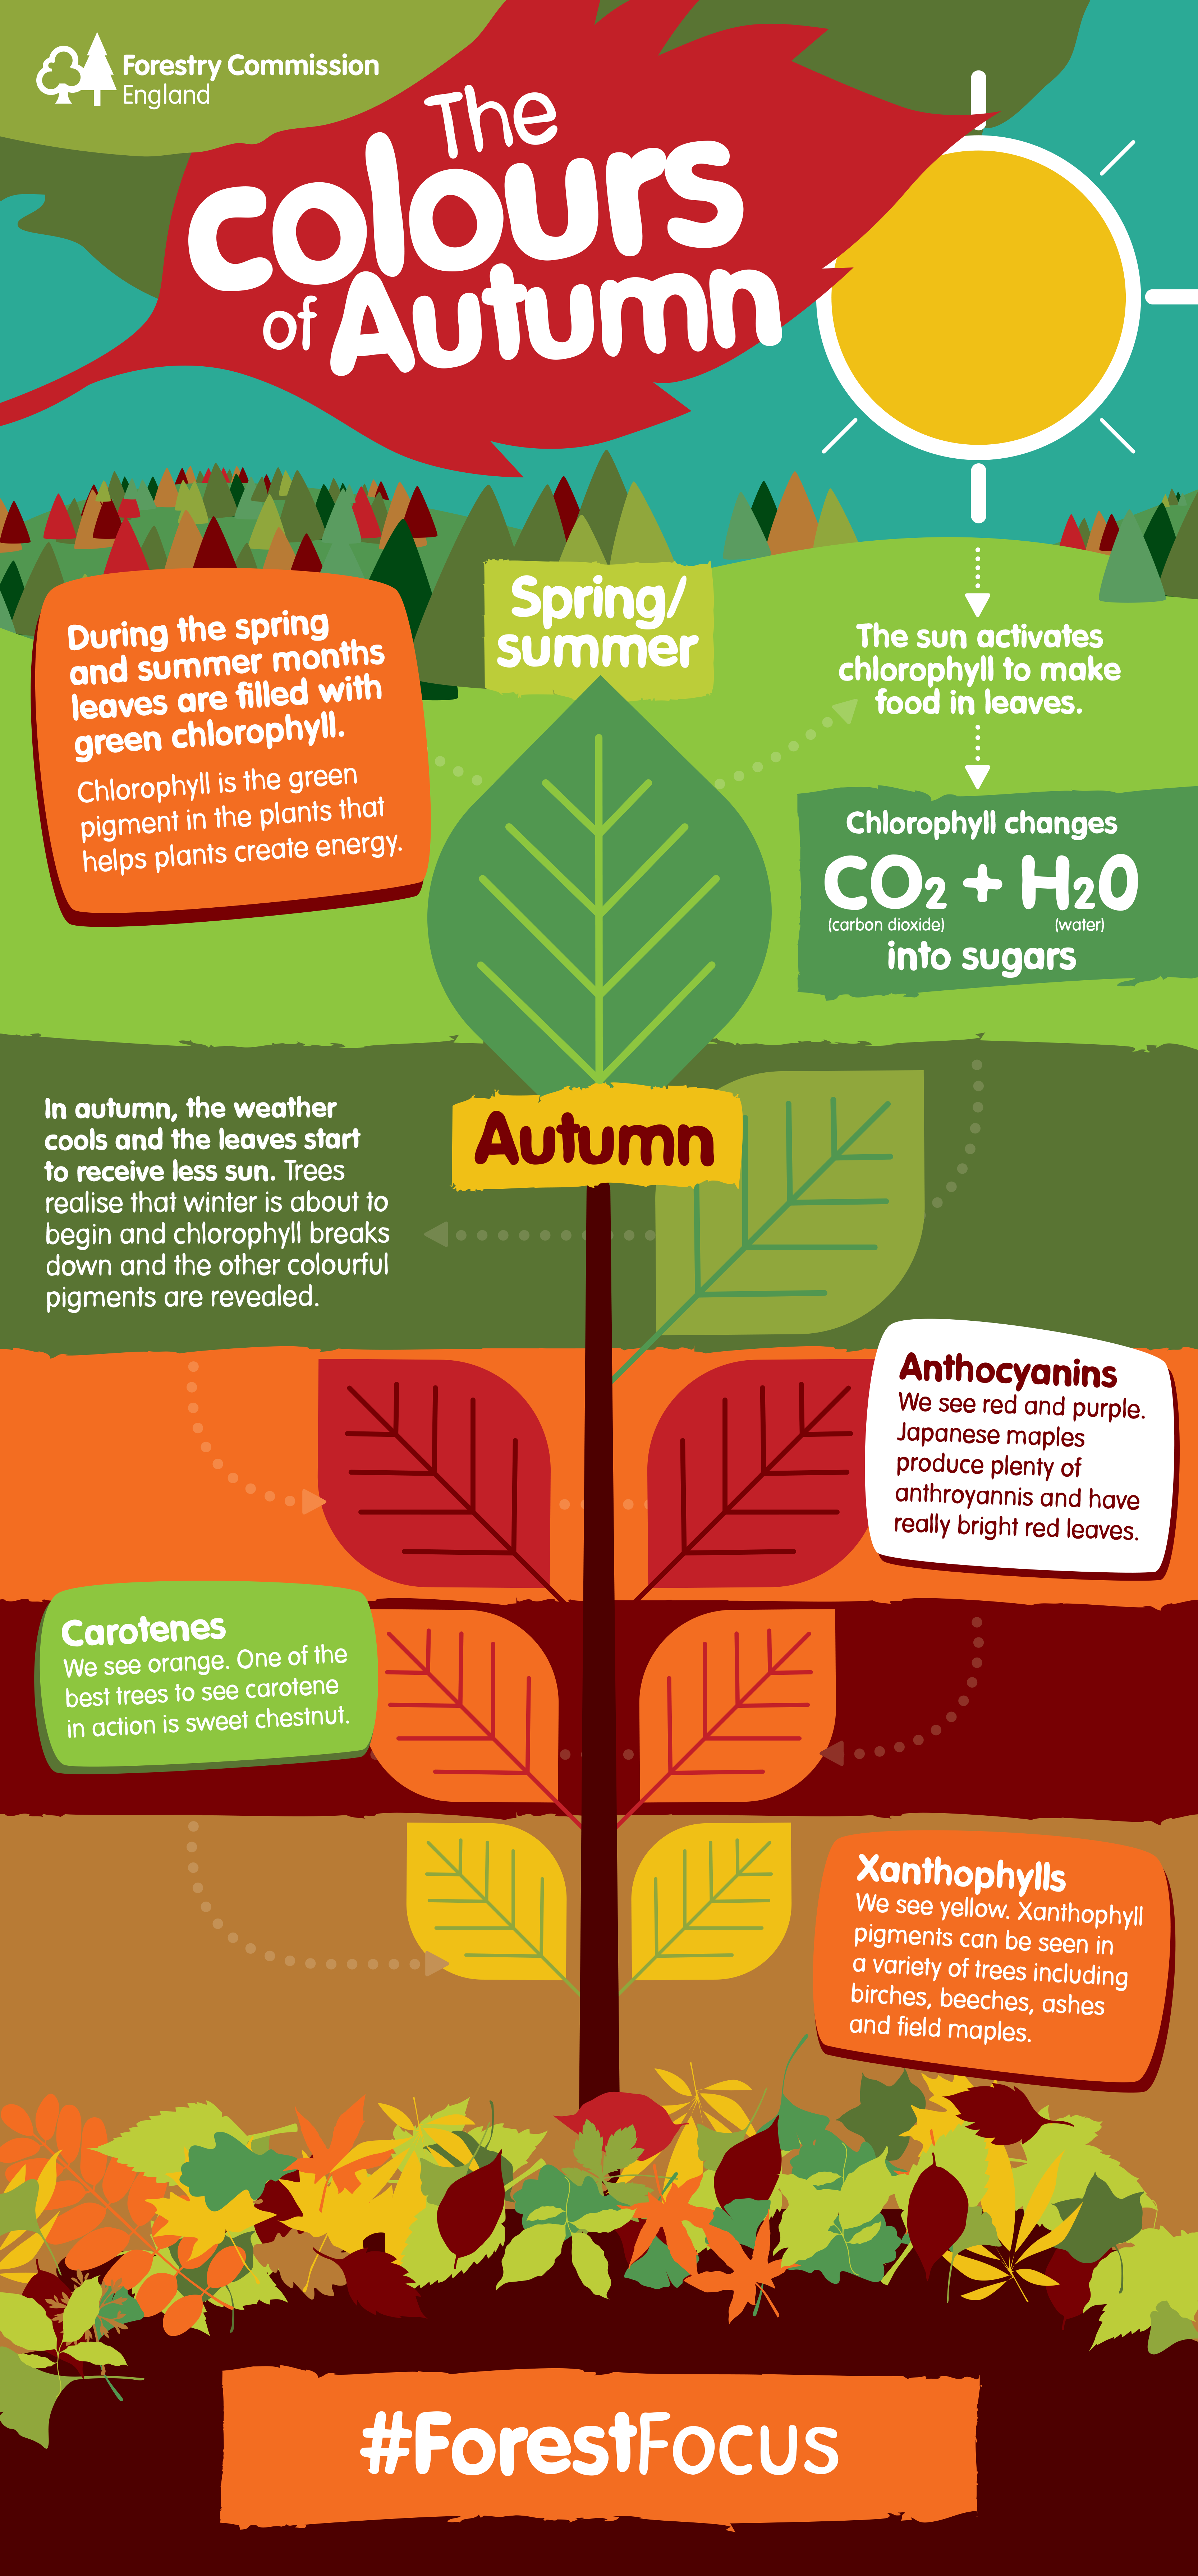 Why do leaves change colour in autumn? | Forestry England